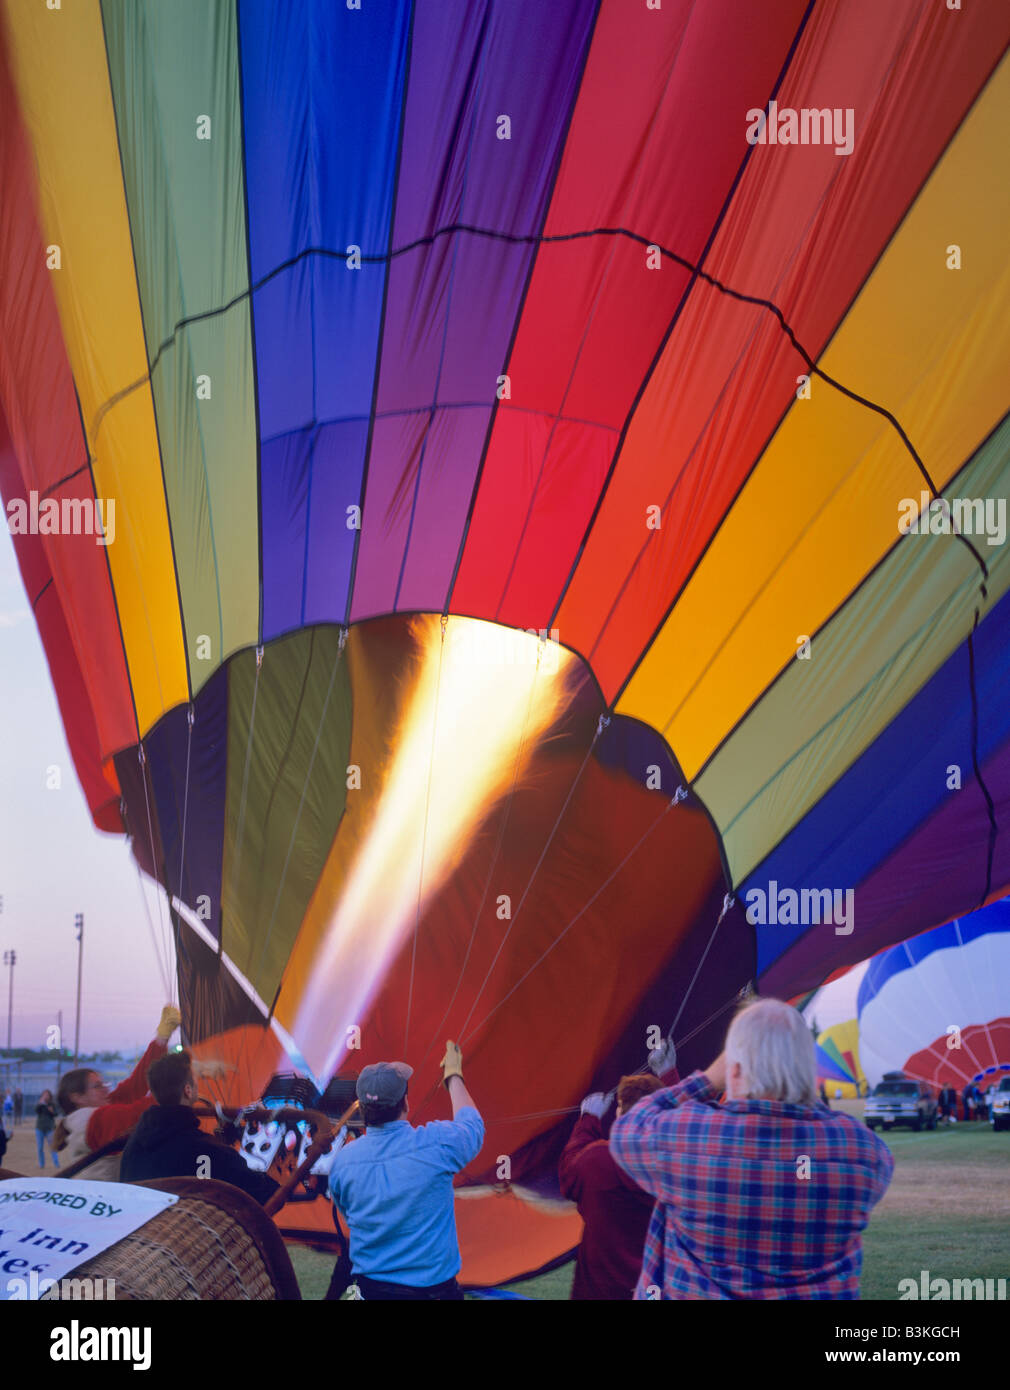 Flame filling hot air balloon Art and Air Festival Albany Oregon Stock